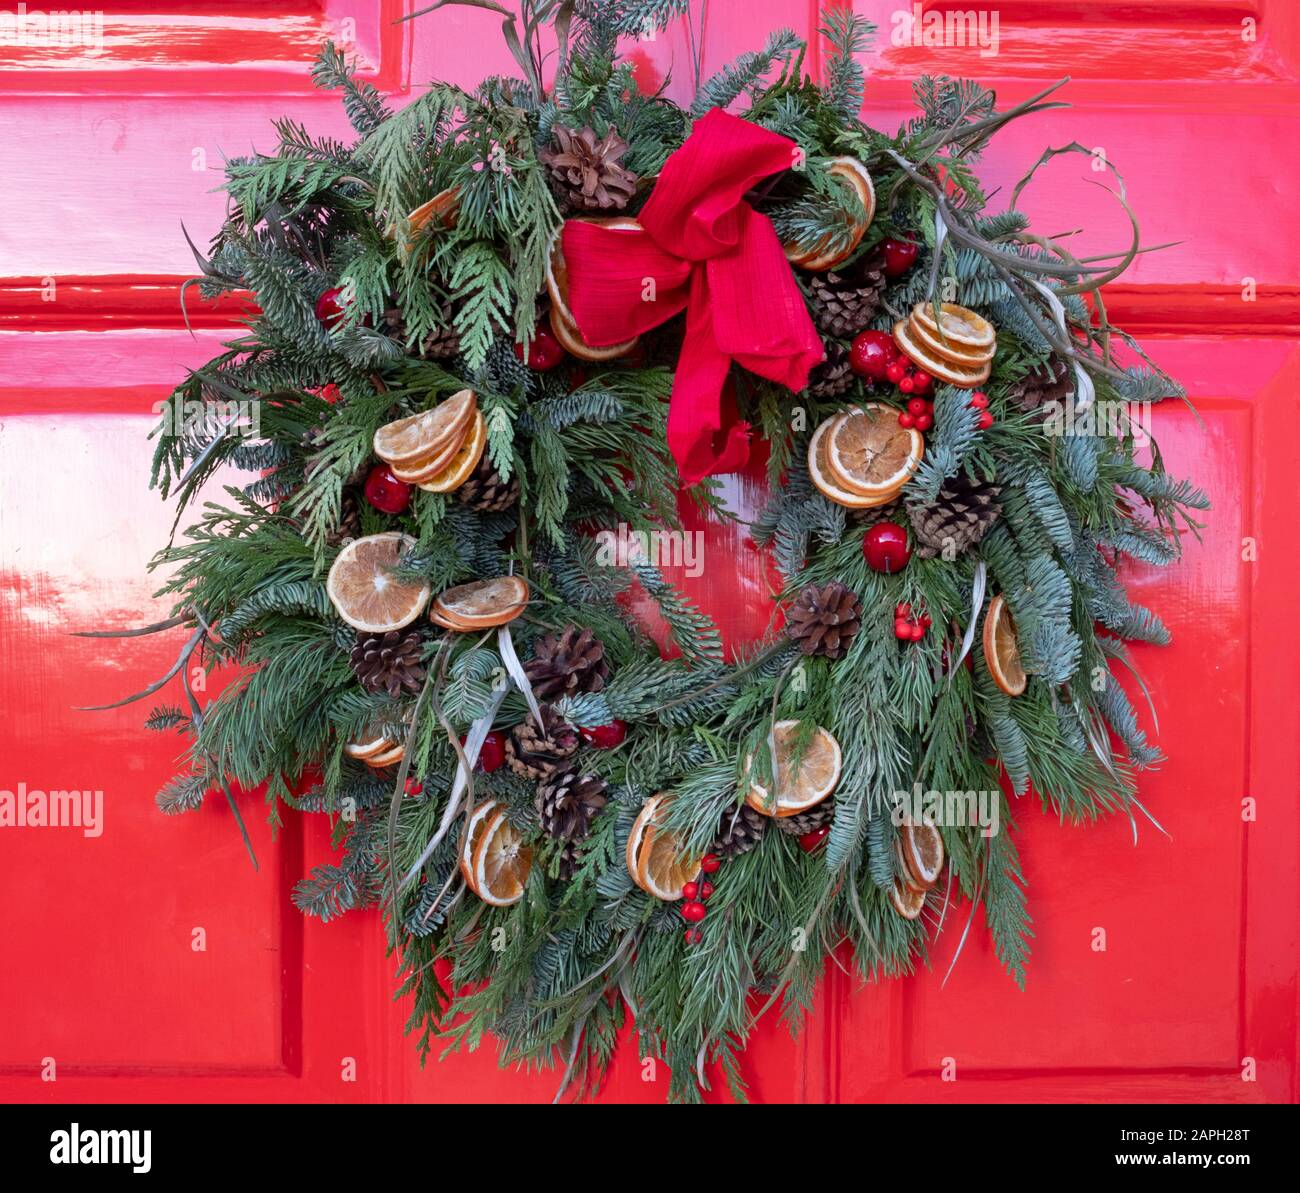 A  fir christmas wreath decorated with a red ribbon, pine cones, and oranges on a red door in London, UK Stock Photo